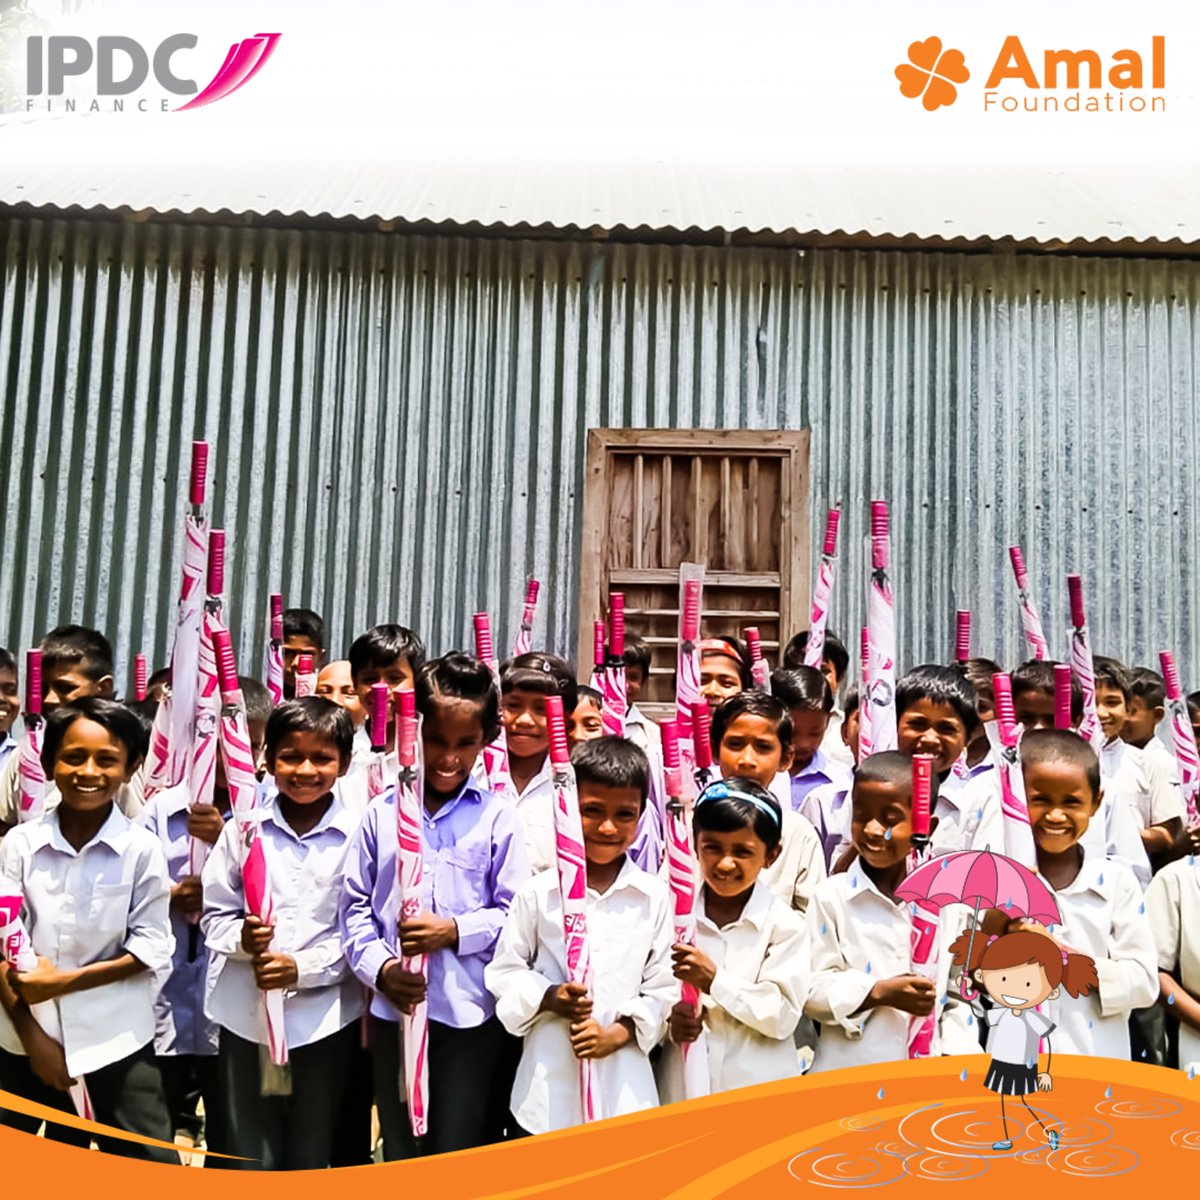 As the rainy season is knocking at the door, students of Ucchas School of Amal Foundation are getting umbrellas to stay dry and safe. We are grateful to IPDC Finance for making these umbrellas possible.

#rainyseason #rainyday #umbrella #school #charity  #education #children